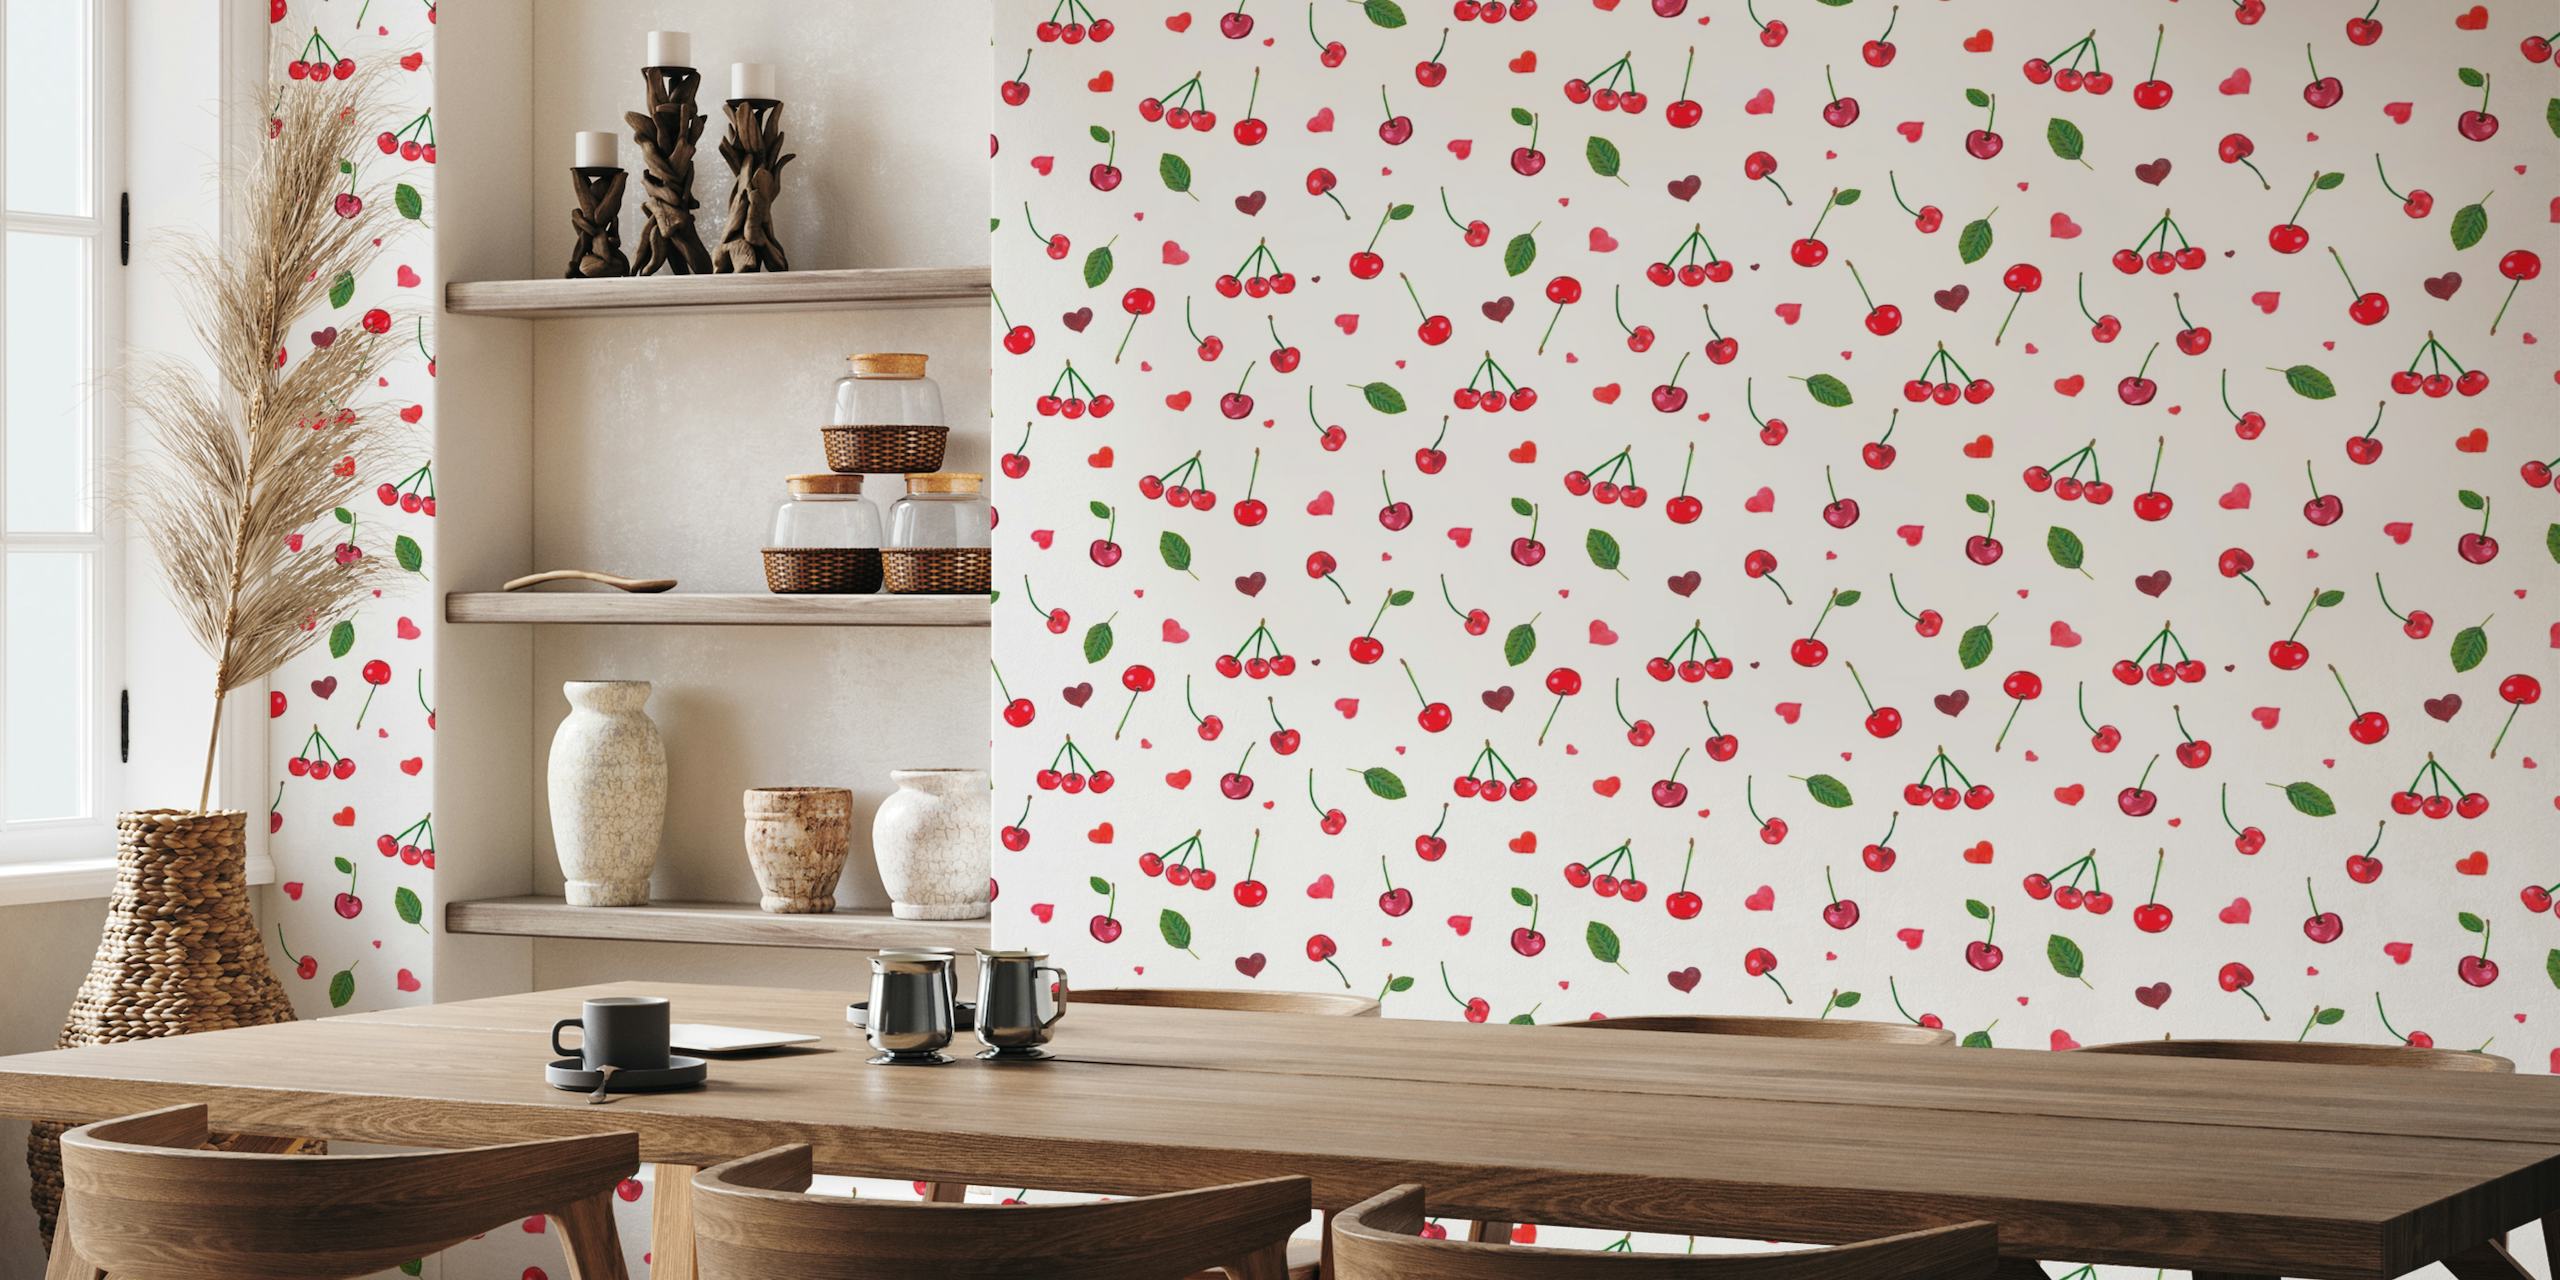 Cherries and cute red hearts white papel pintado